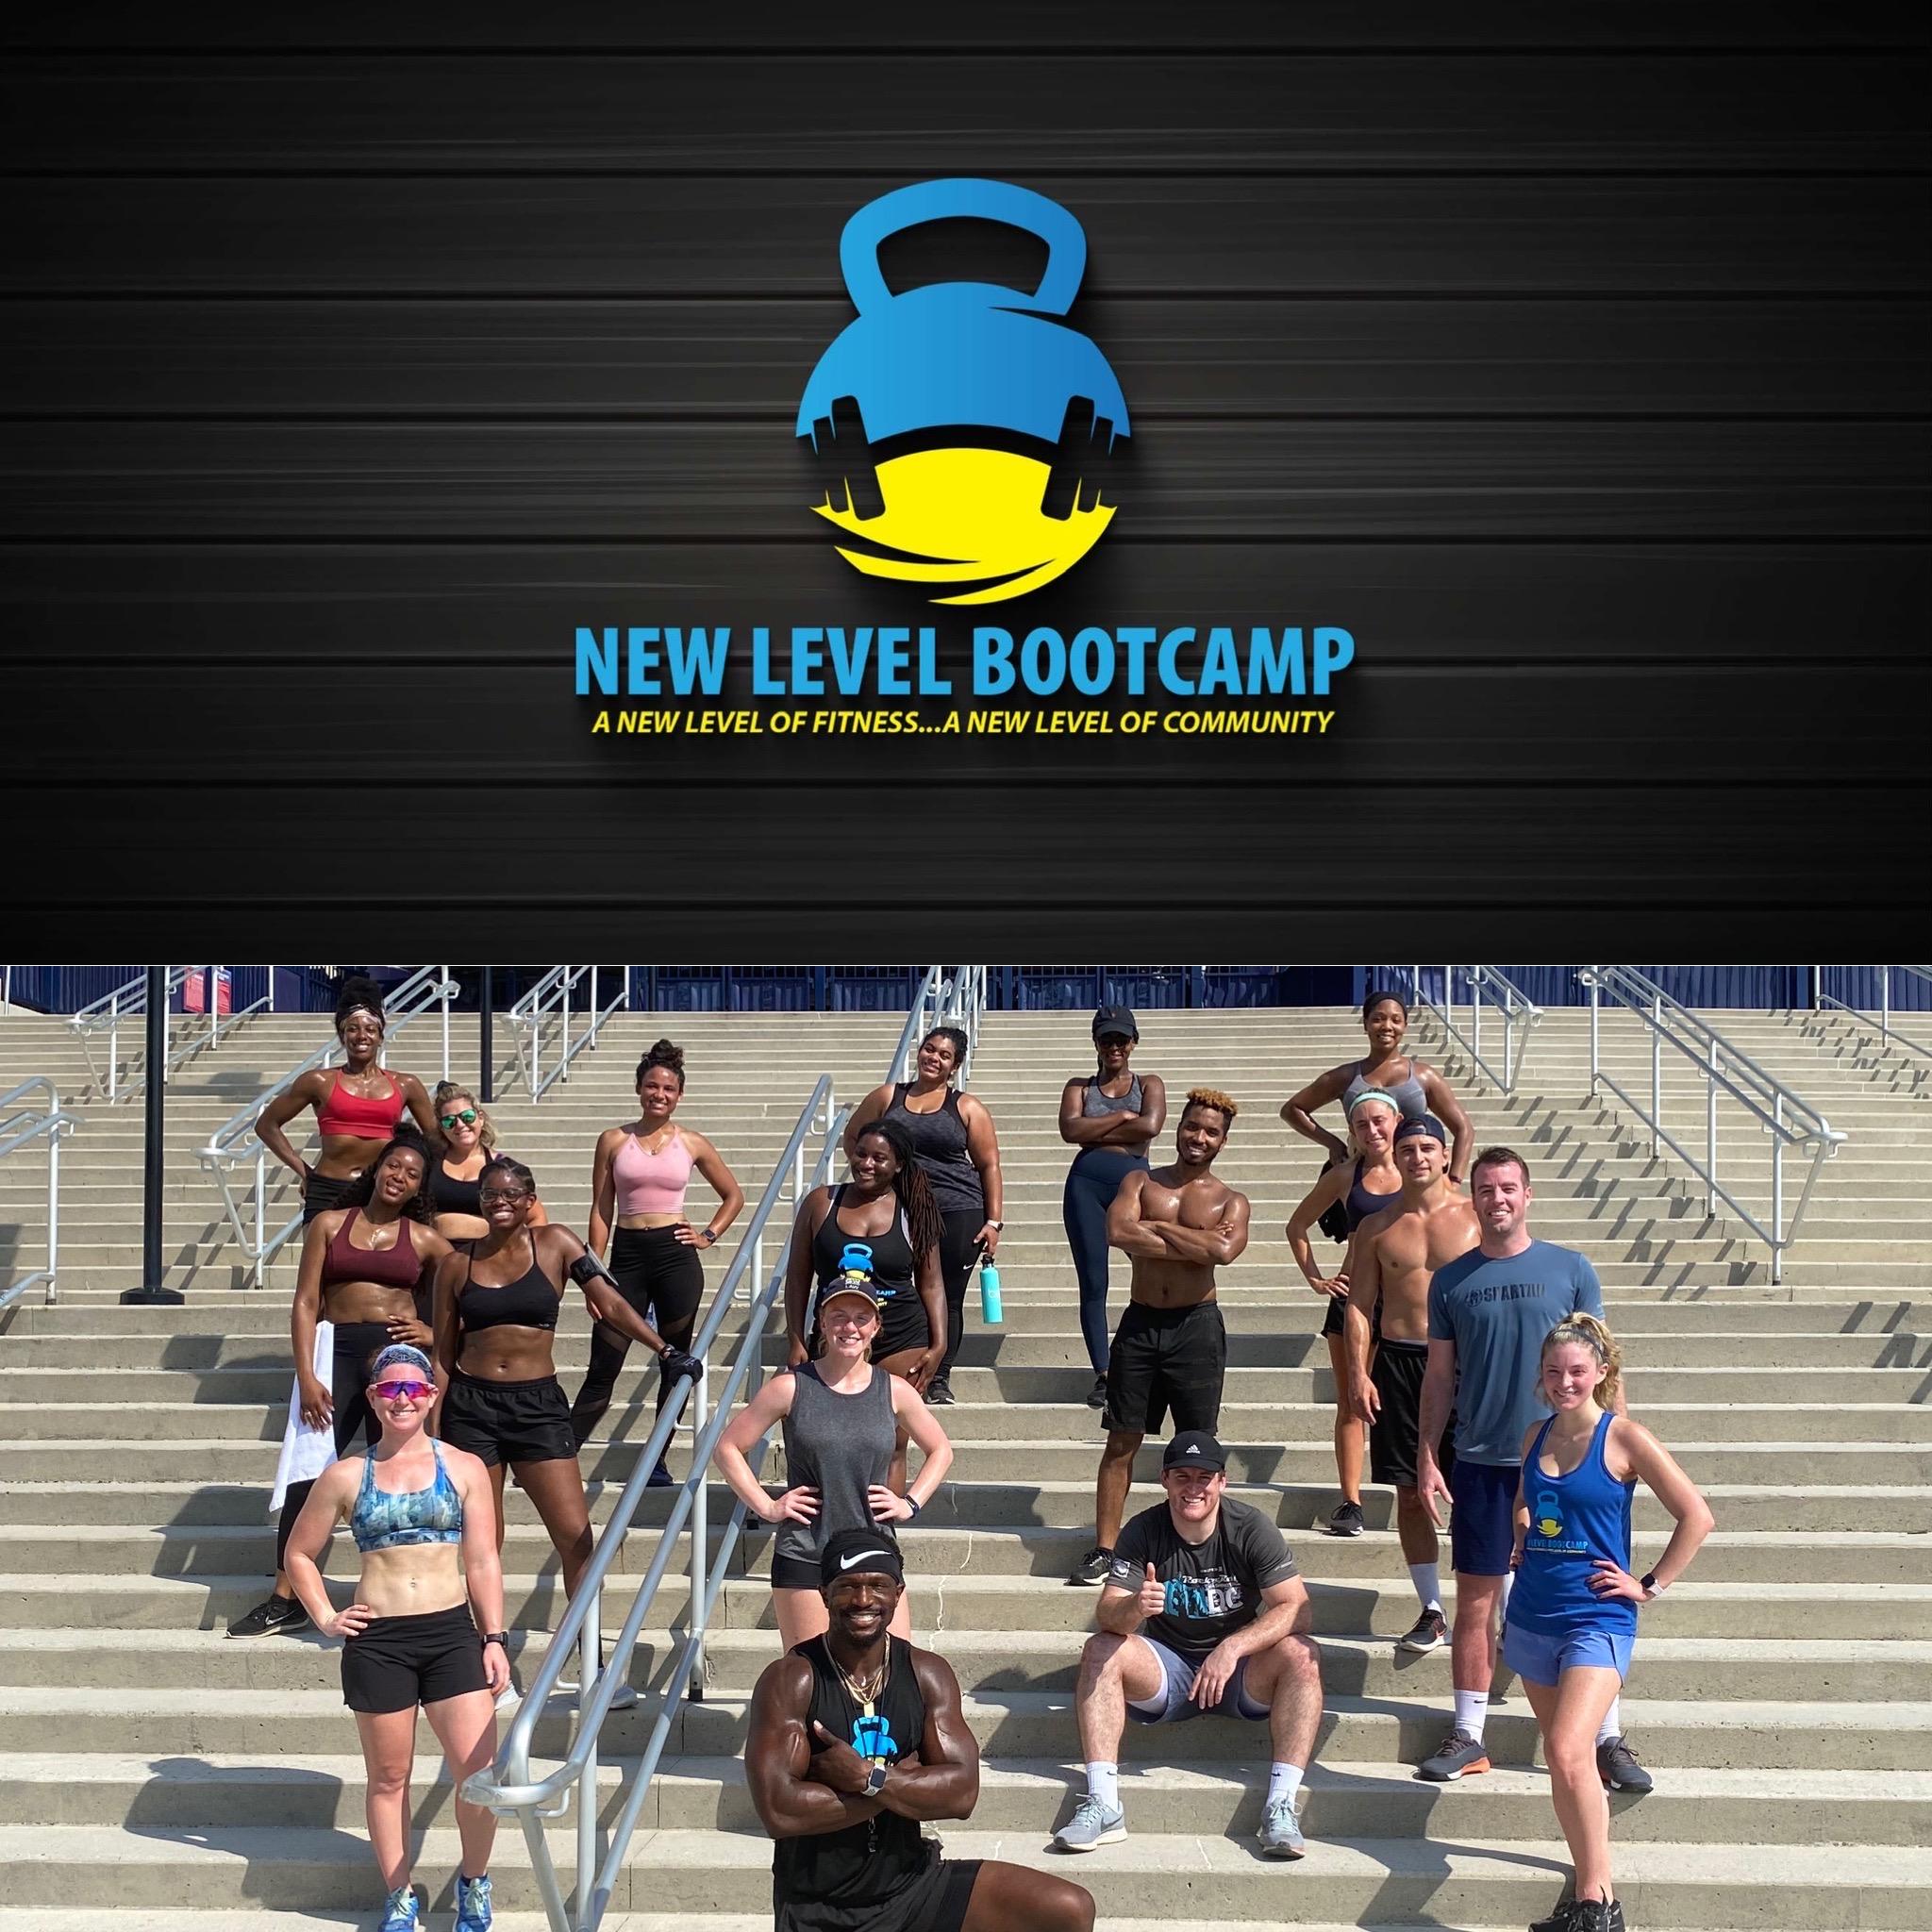 New Level Bootcamp! Free Workout - Alethia Tanner Park